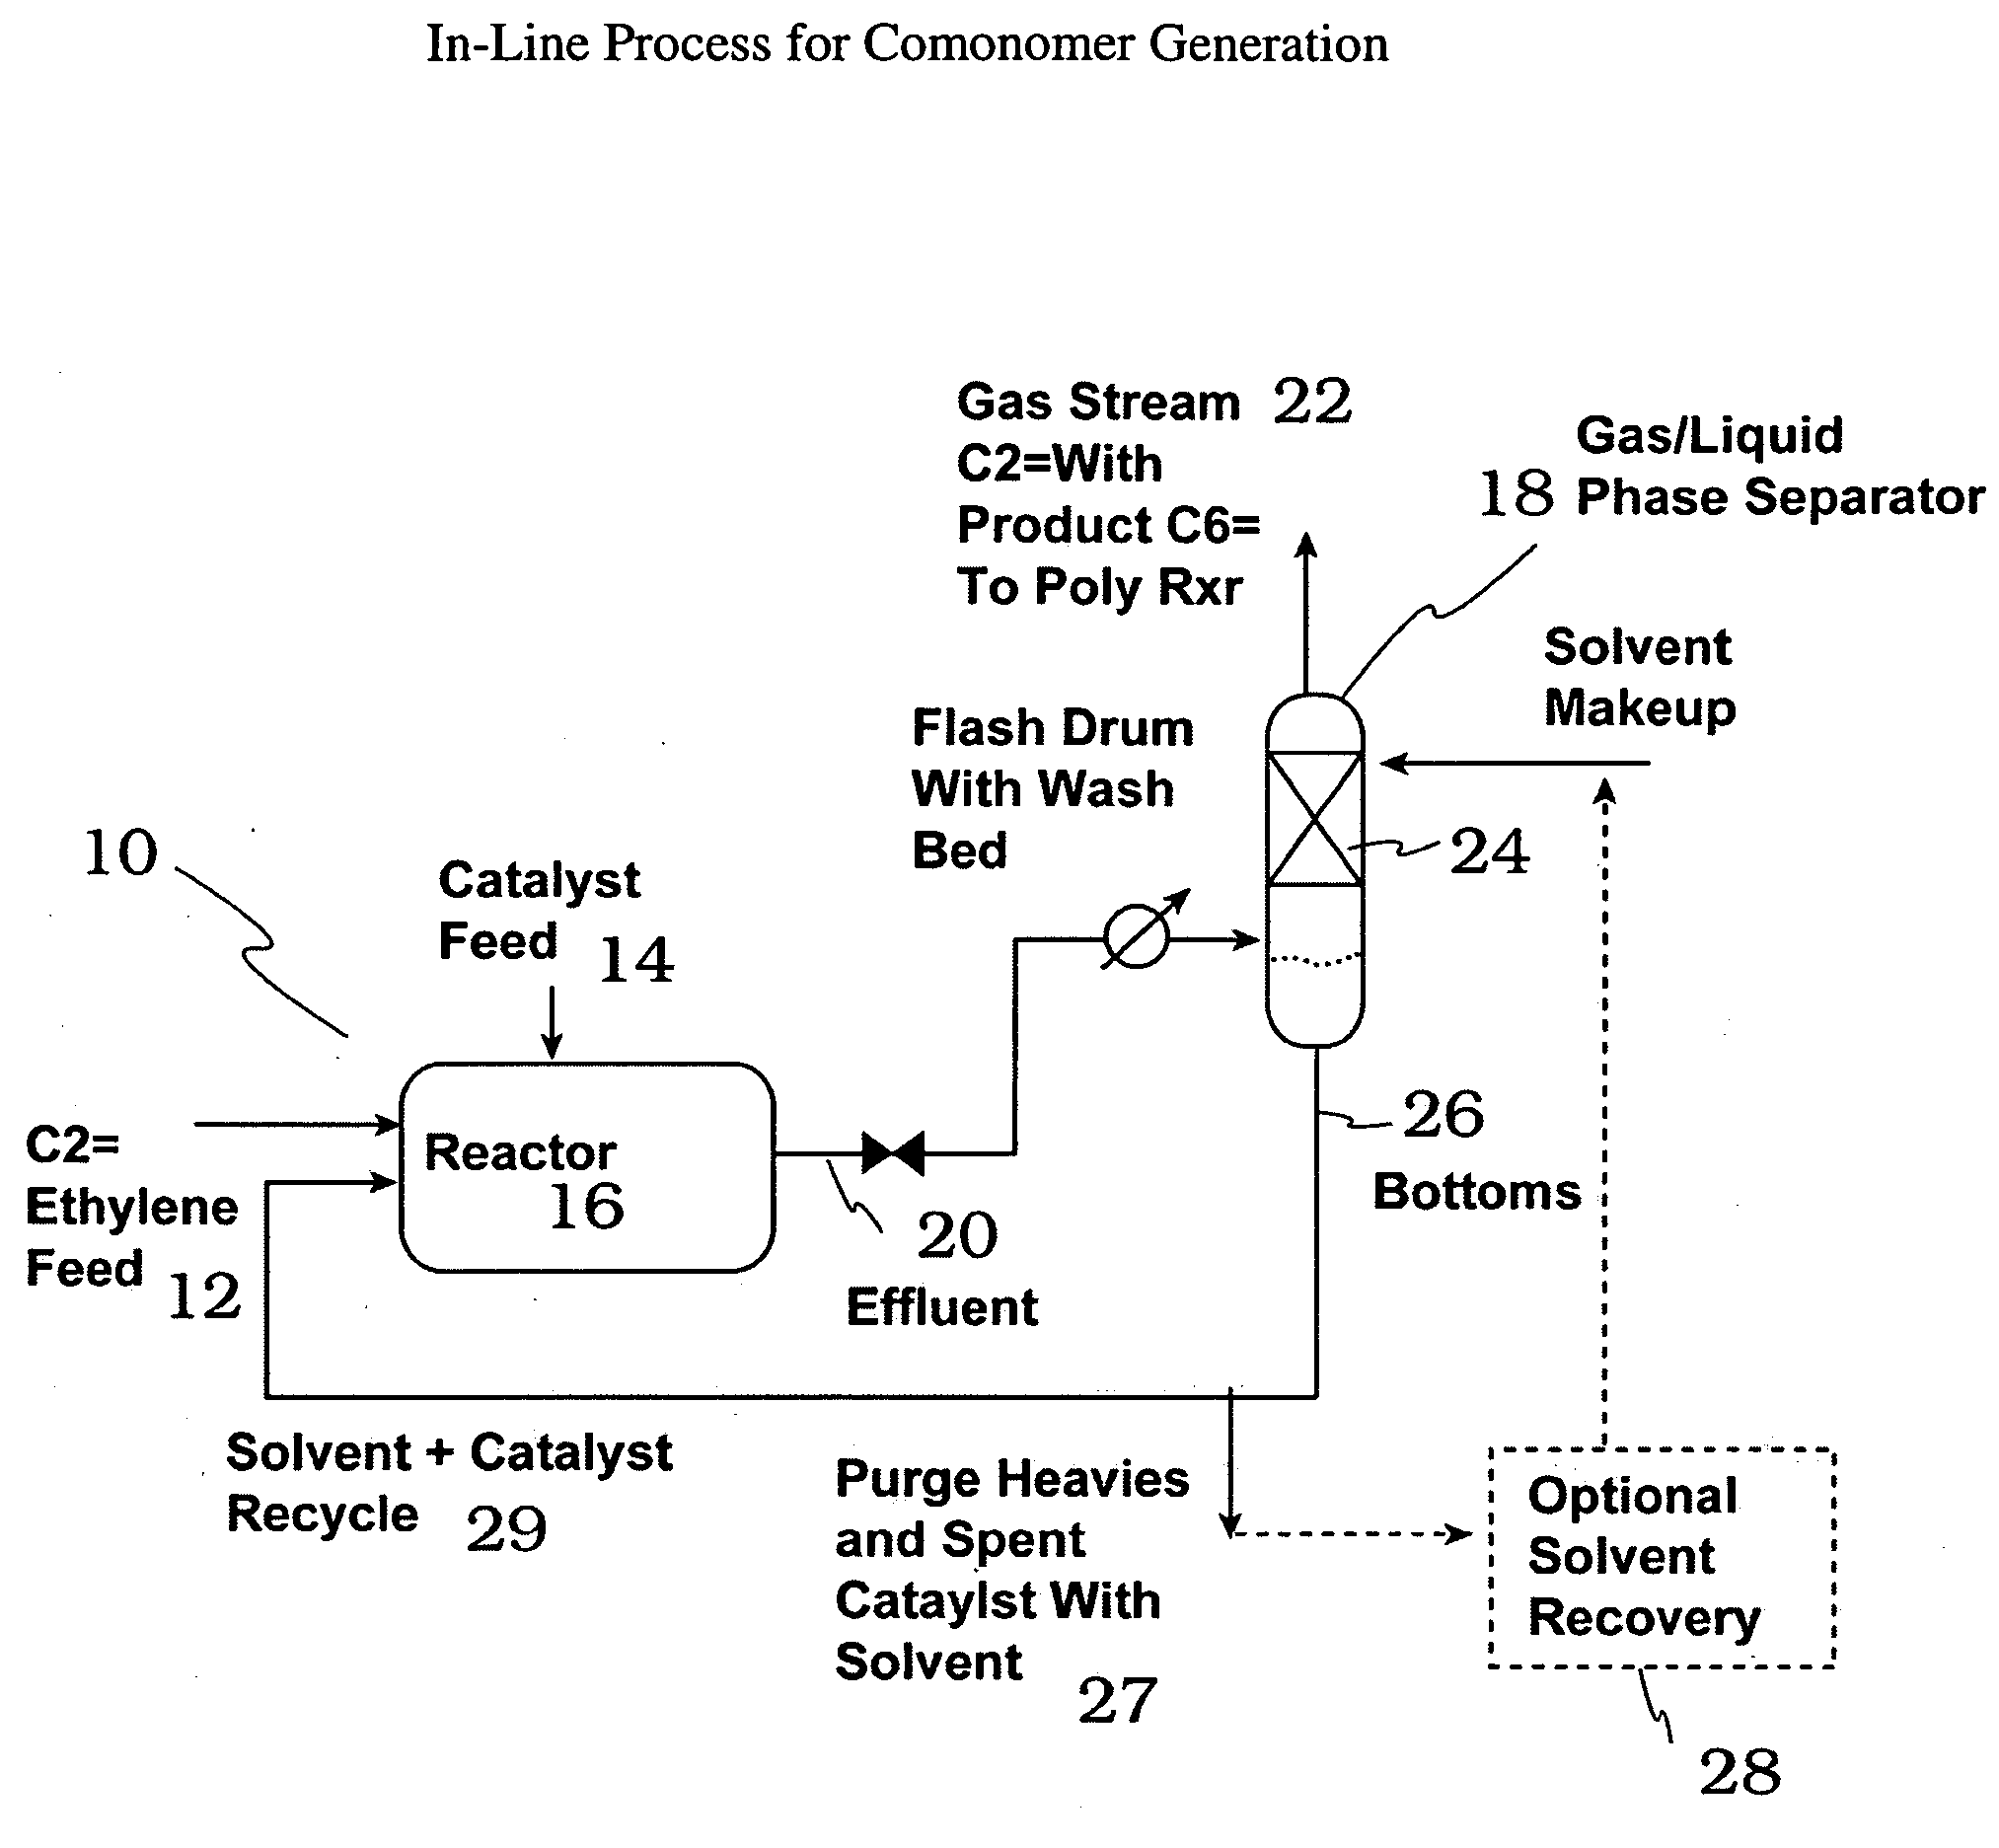 In-line process for generating comonomer